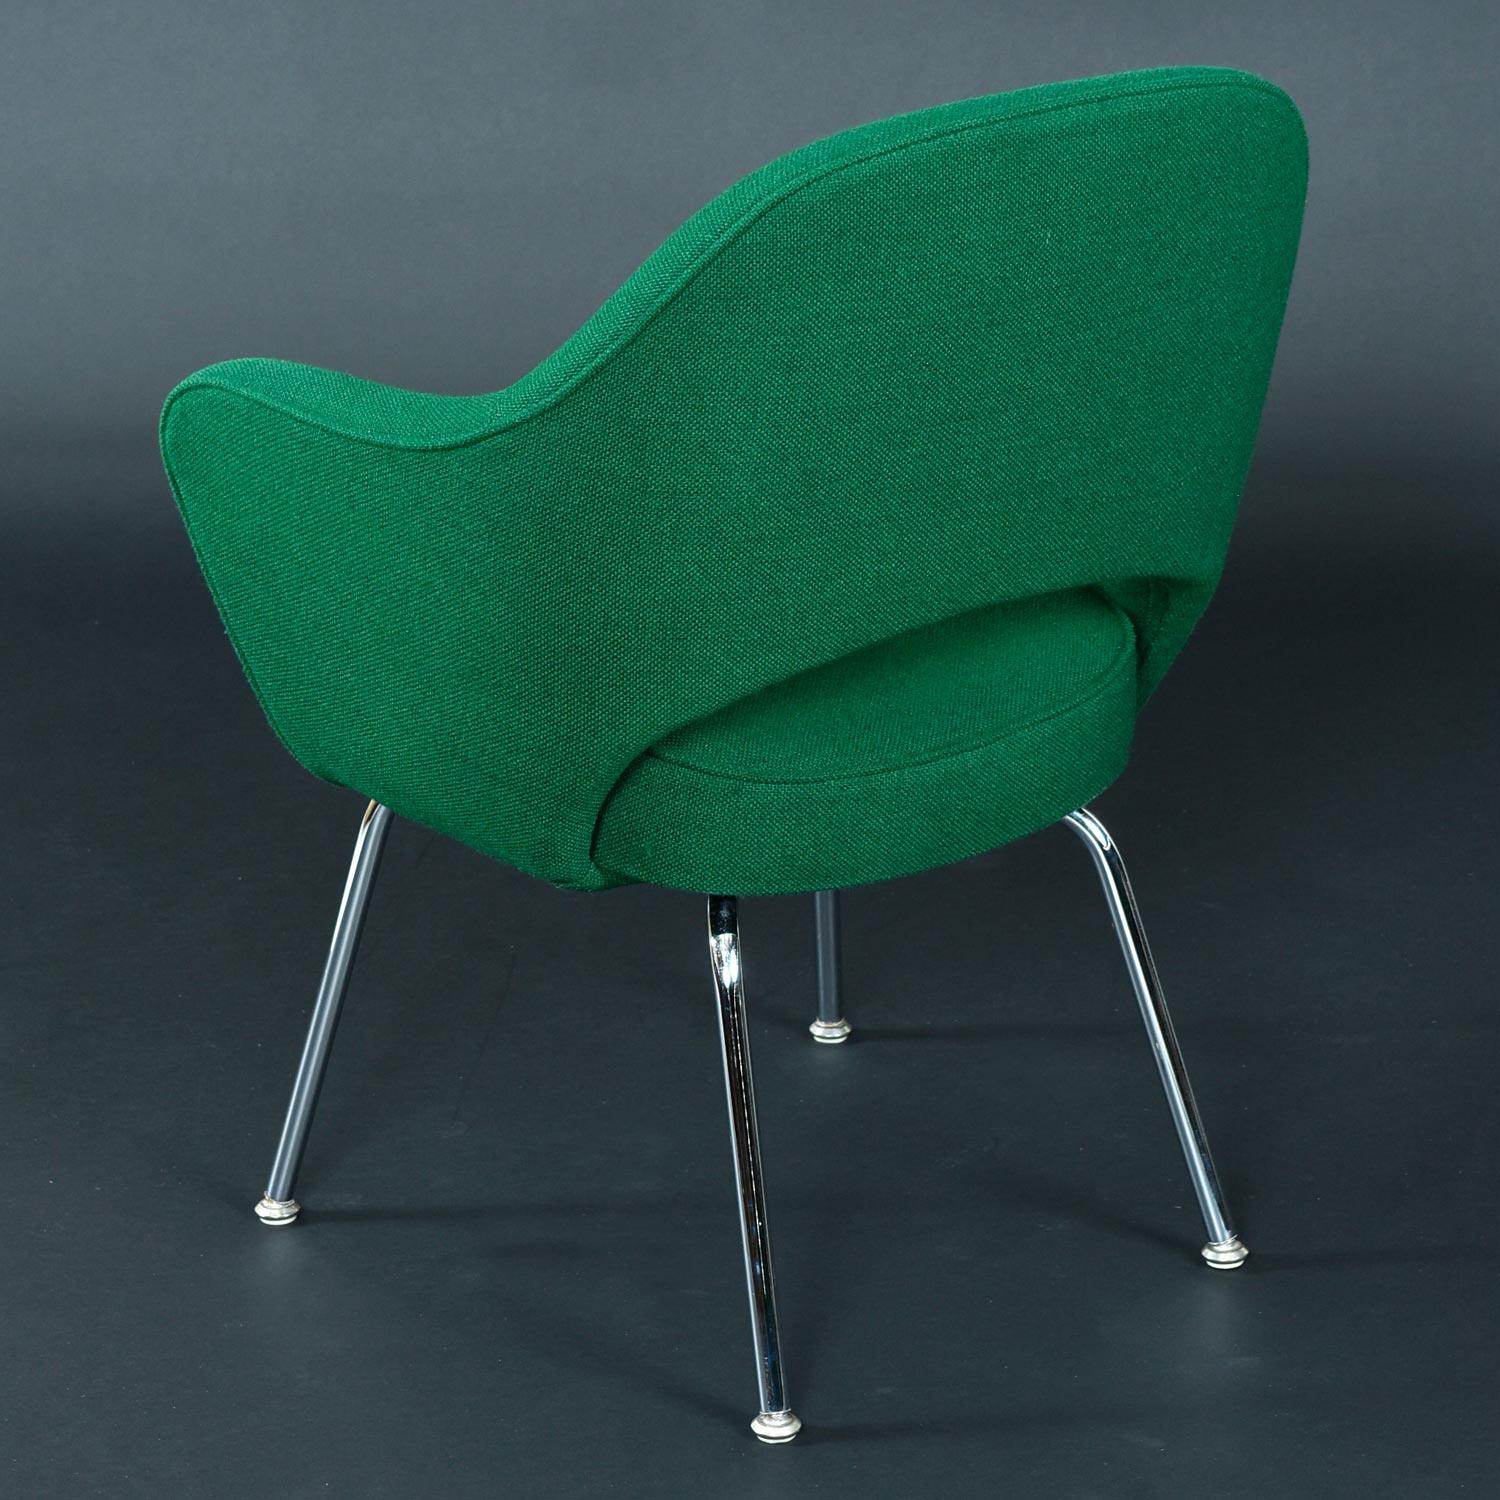 Stainless Steel Pair of Emerald Green Eero Saarinen for Knoll Executive Arm Chairs